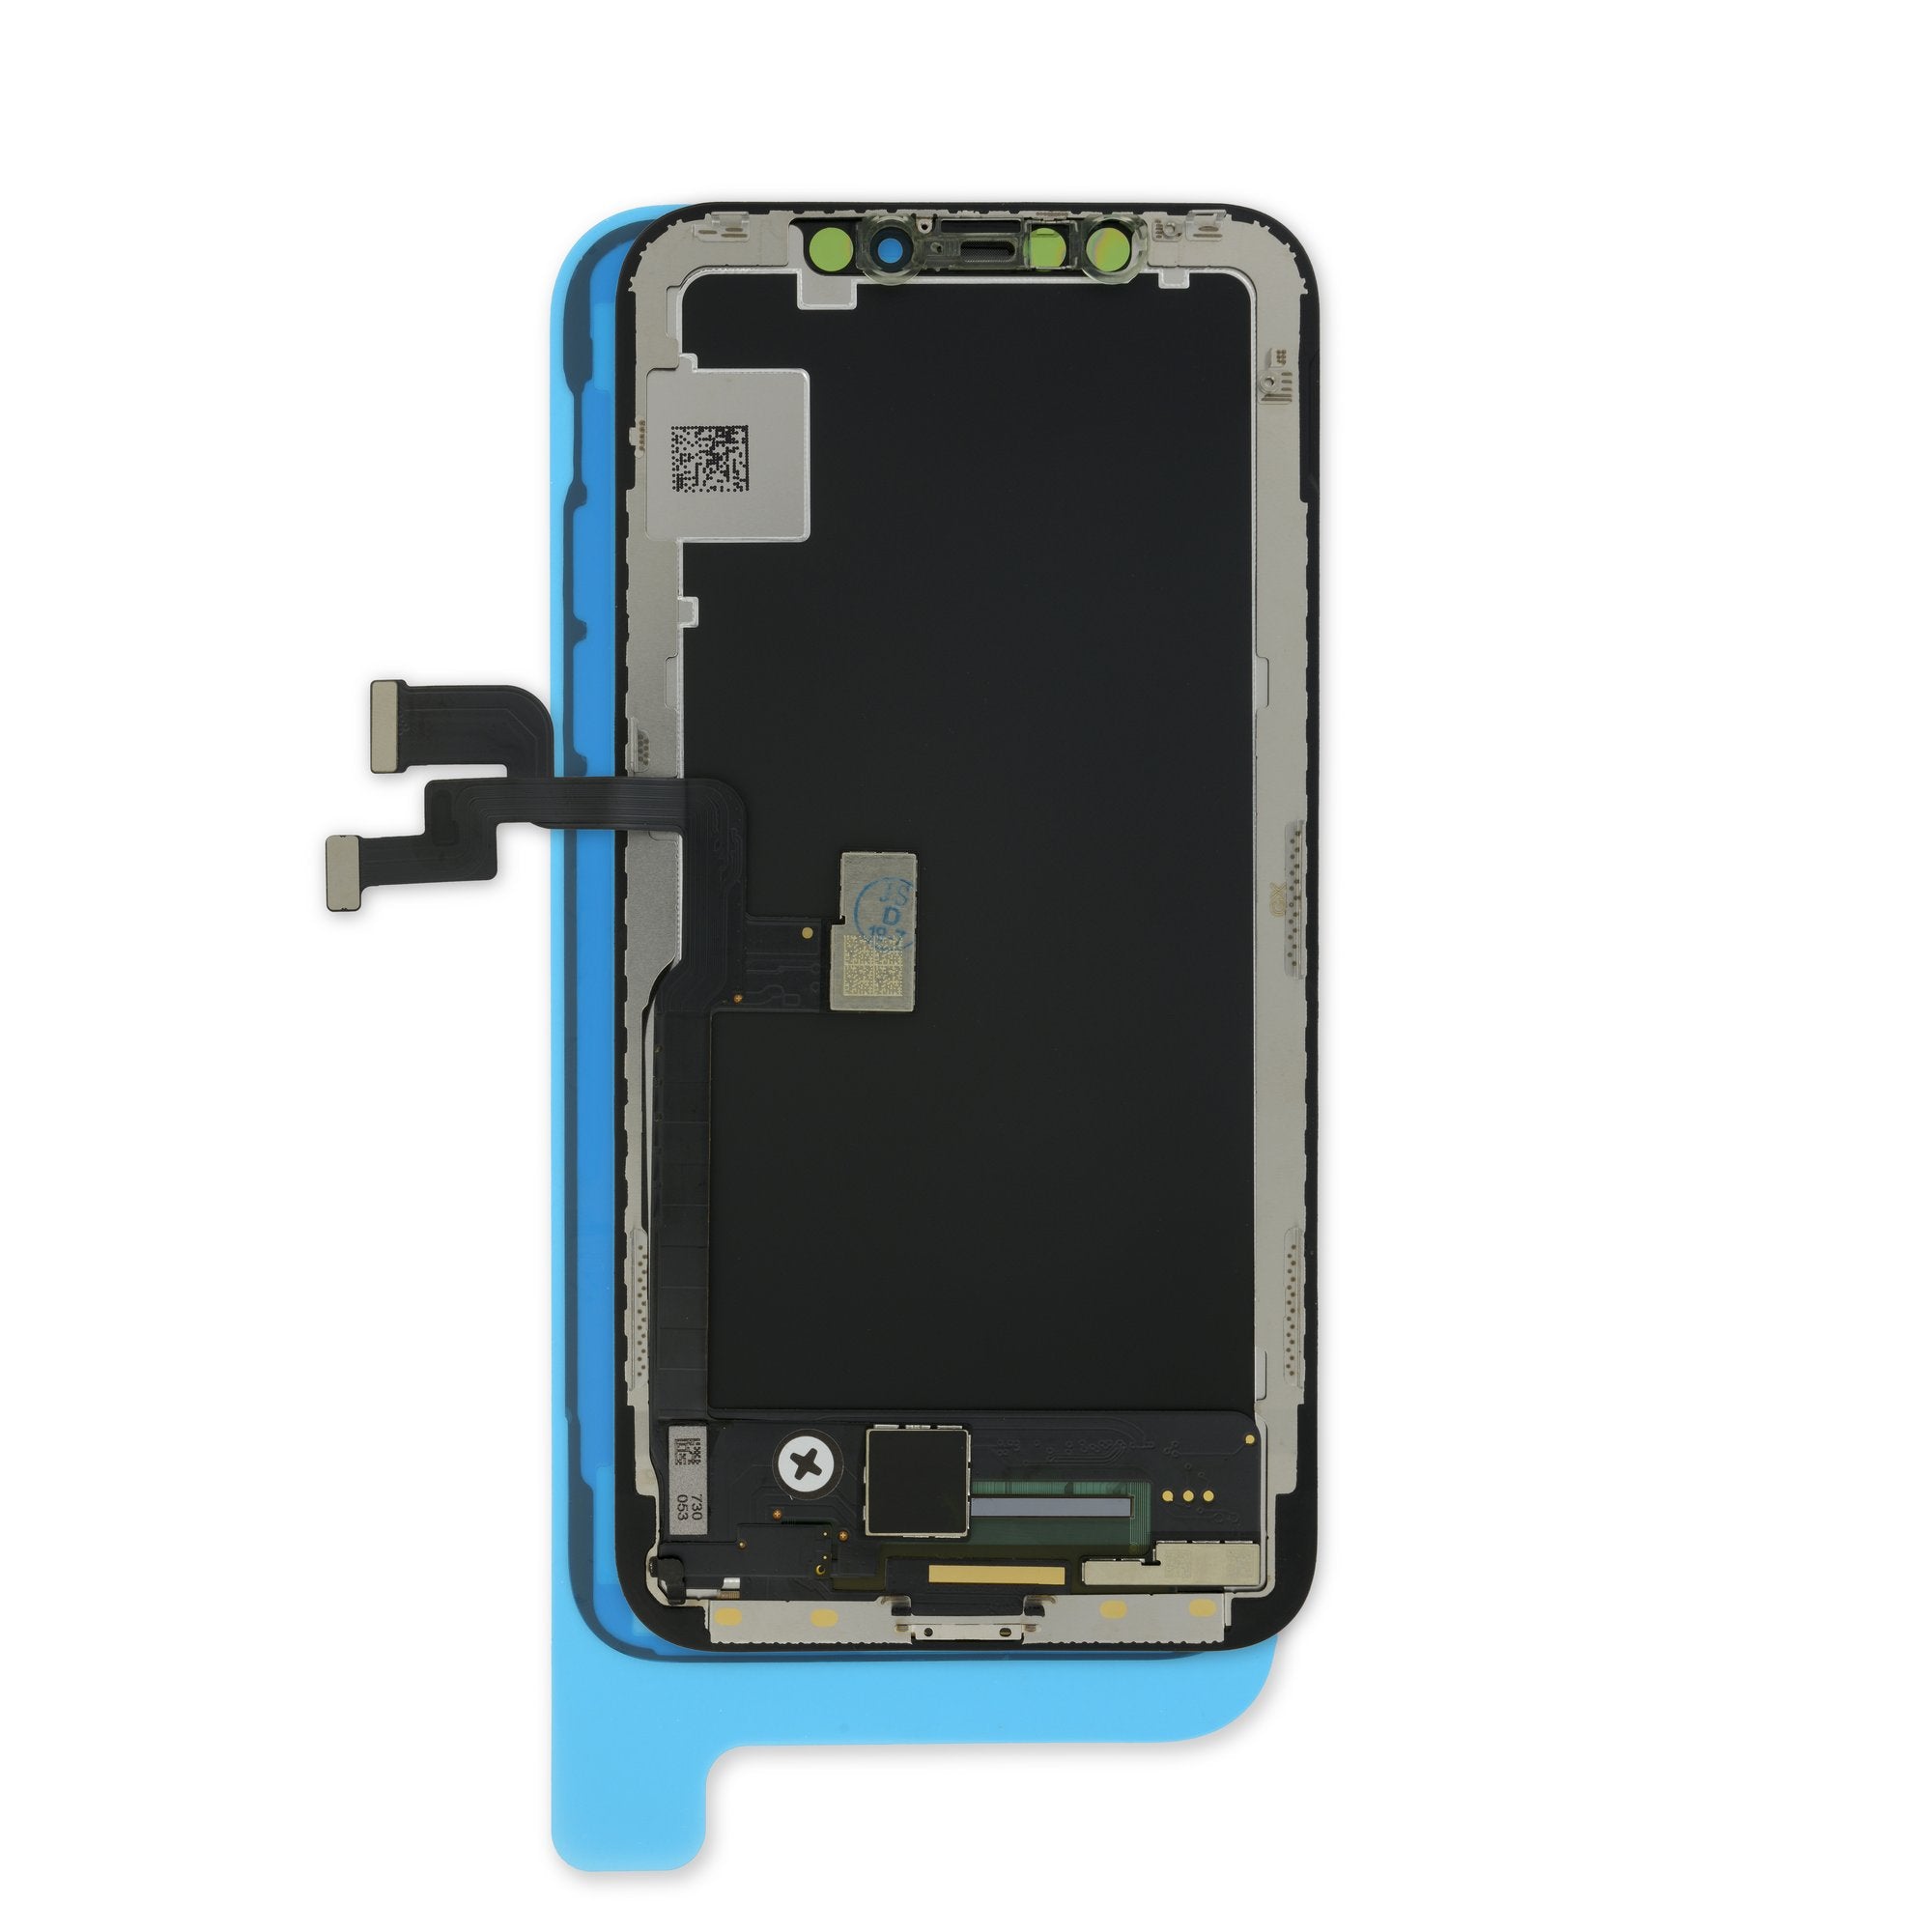 iPhone X Screen: LCD / OLED and Digitizer Repair Kit - iFixit